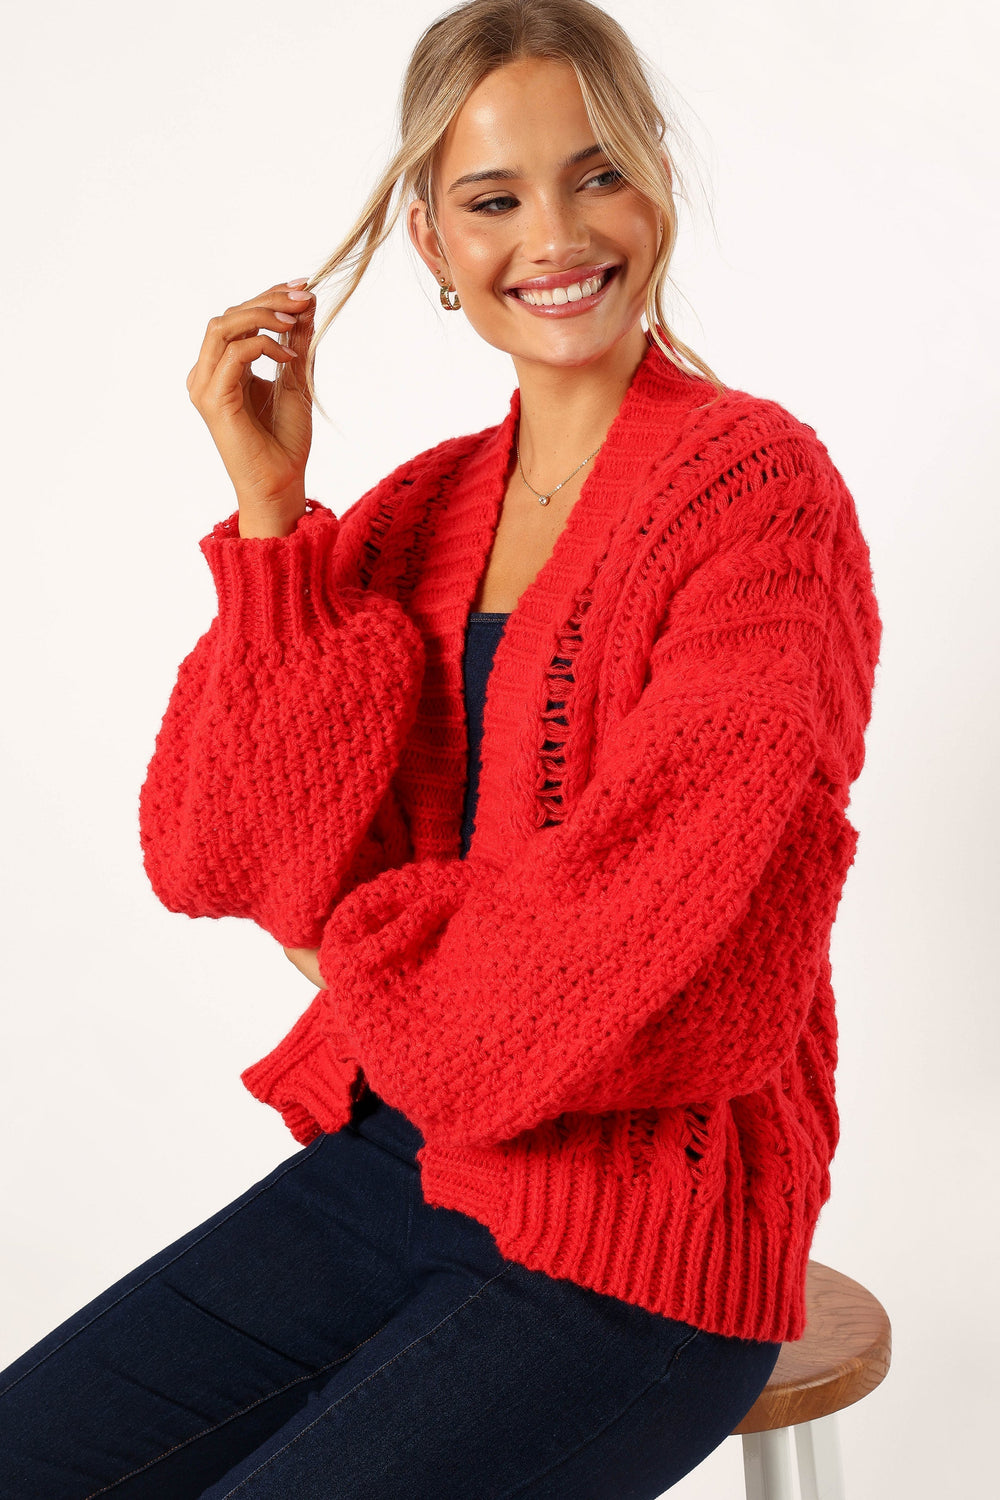 Petal and Pup USA KNITWEAR Hailey Oversized Sleeve Cardigan - Red